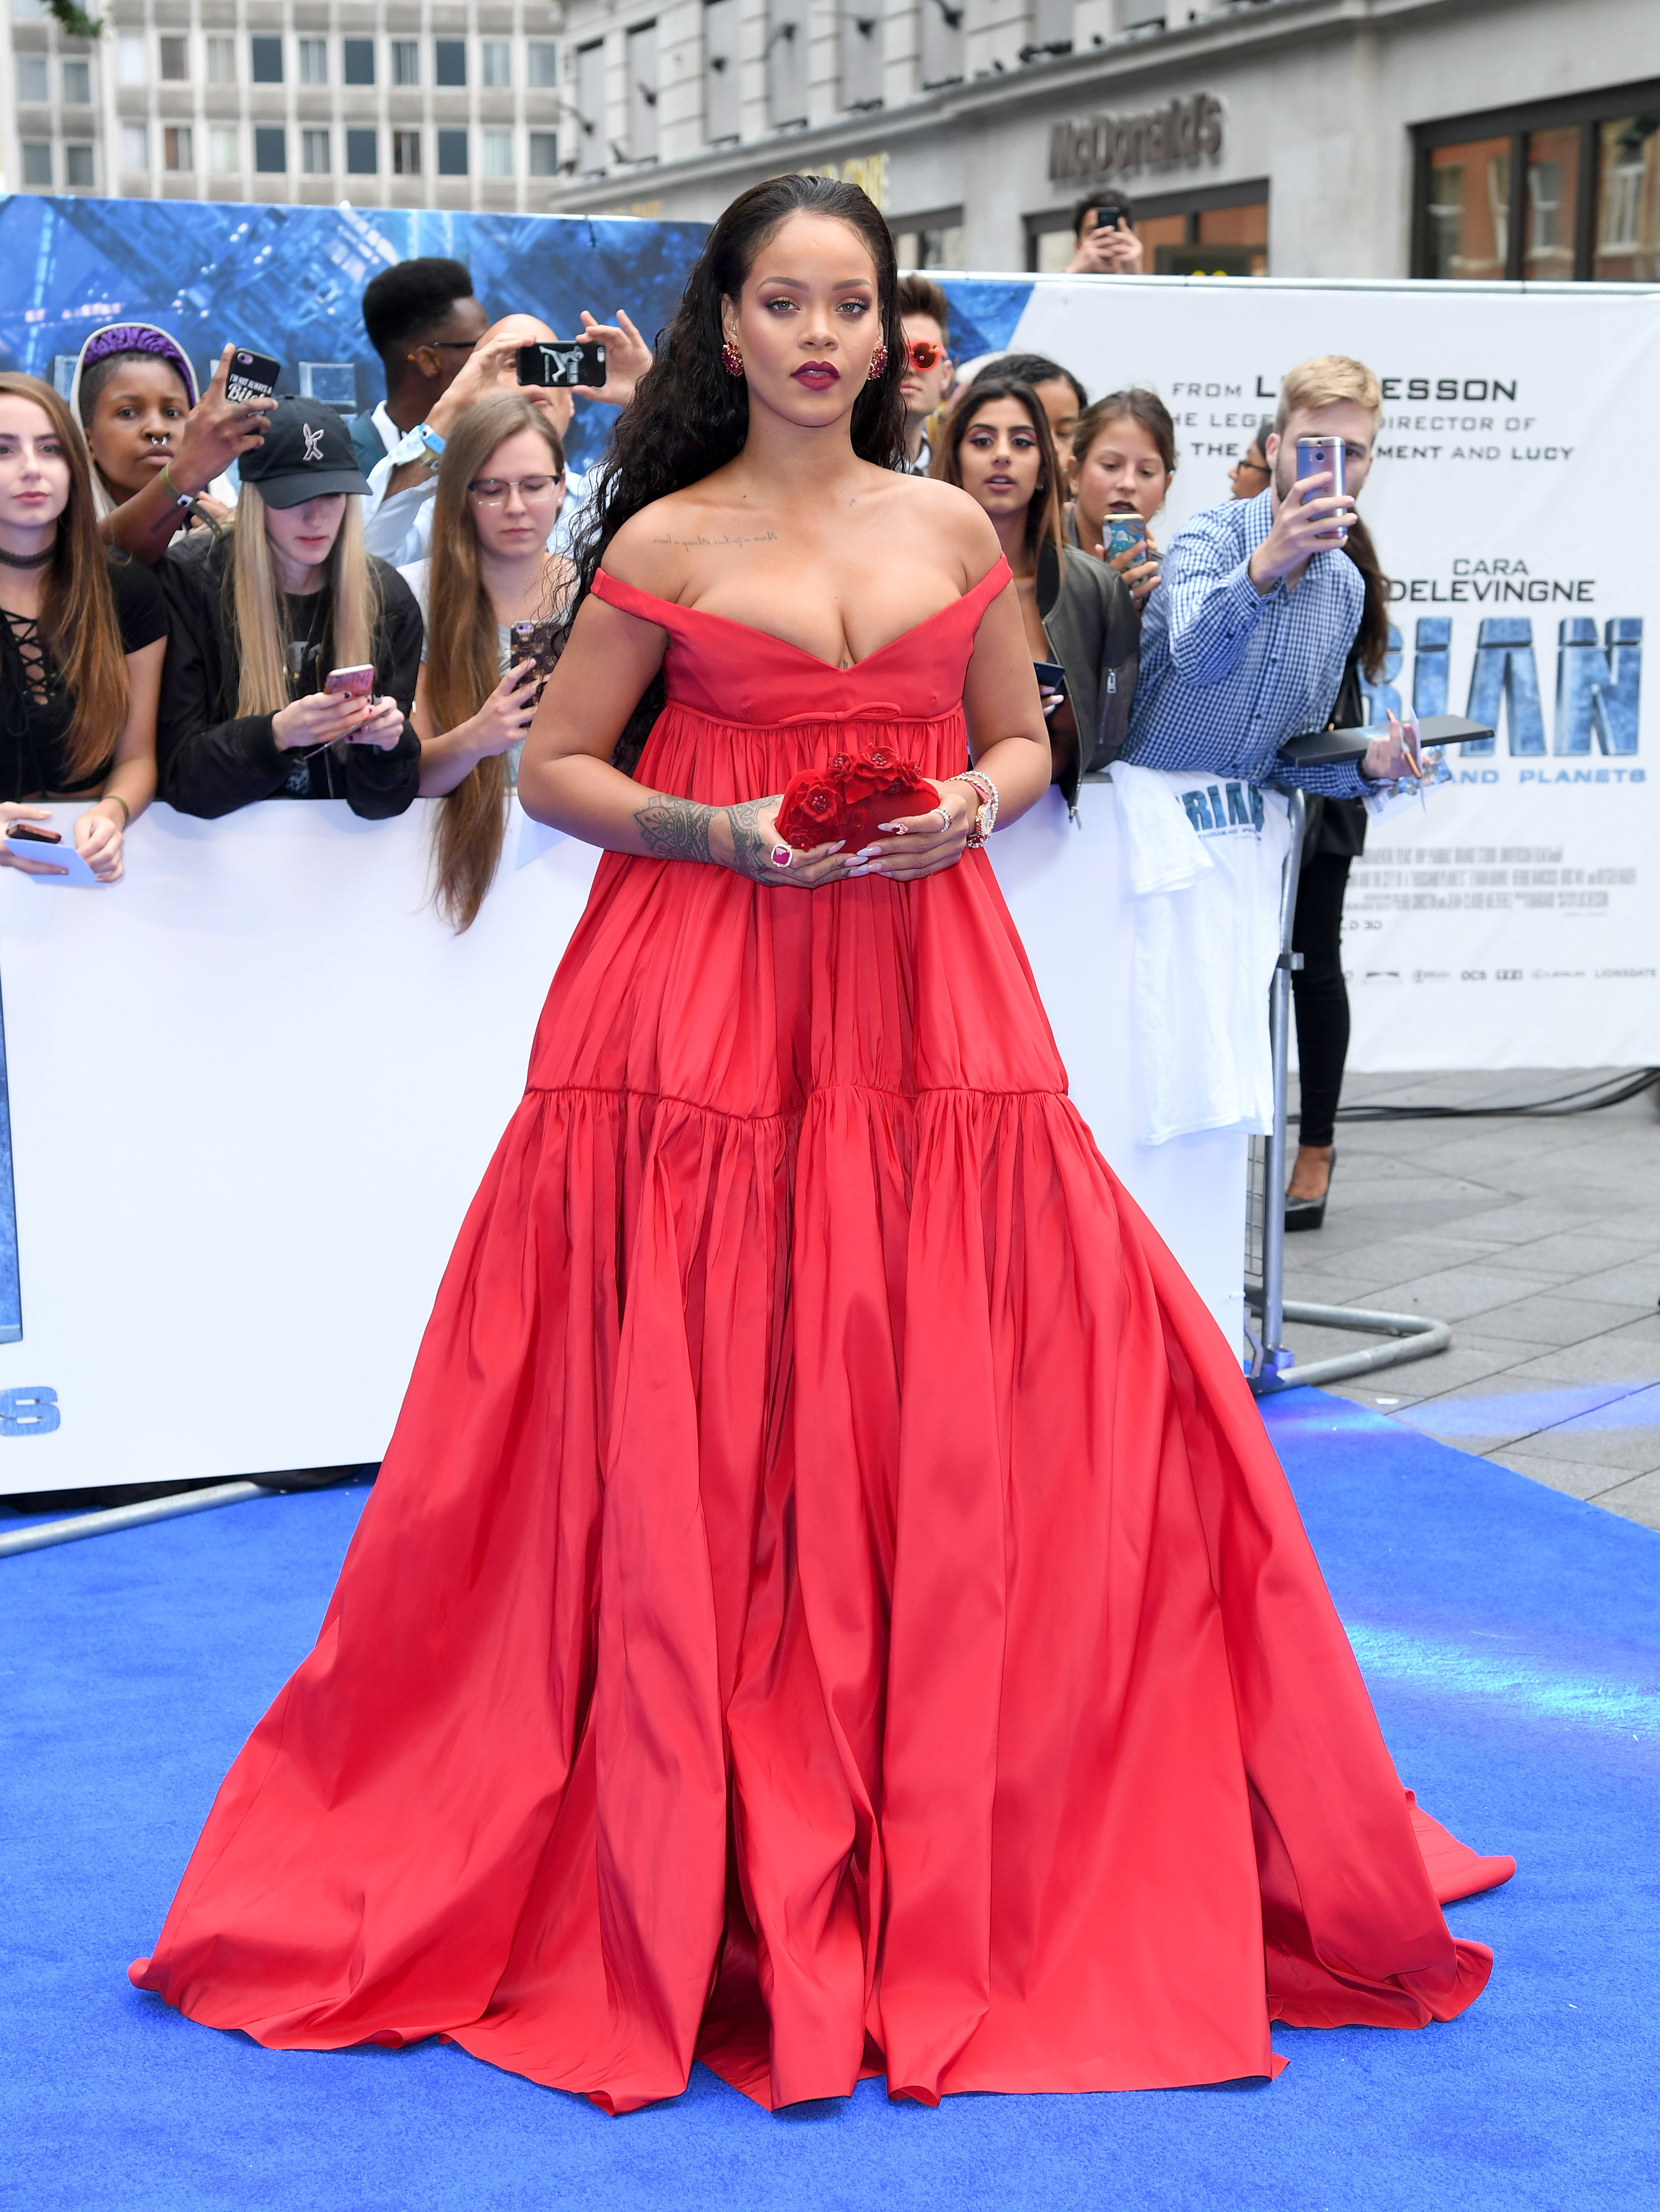 Rihanna Wears Red Dress to Valerian London Premiere  Rihanna Valerian  Premiere Giambattista Valli Couture Dress